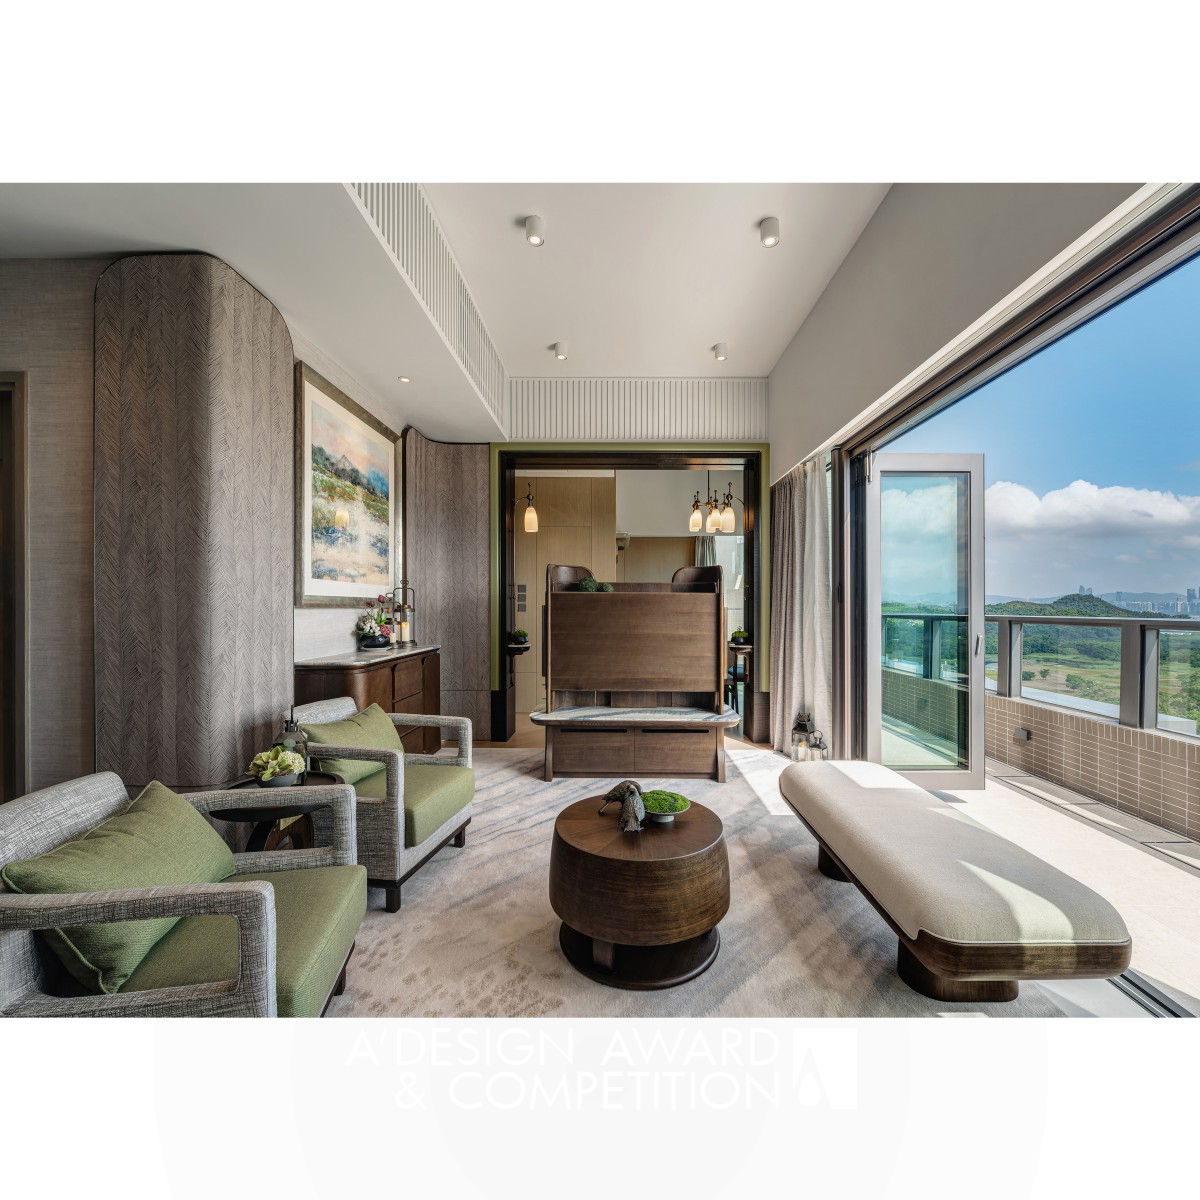 Wetland Seasons Park Luxury Residential by YAY CONCEPT